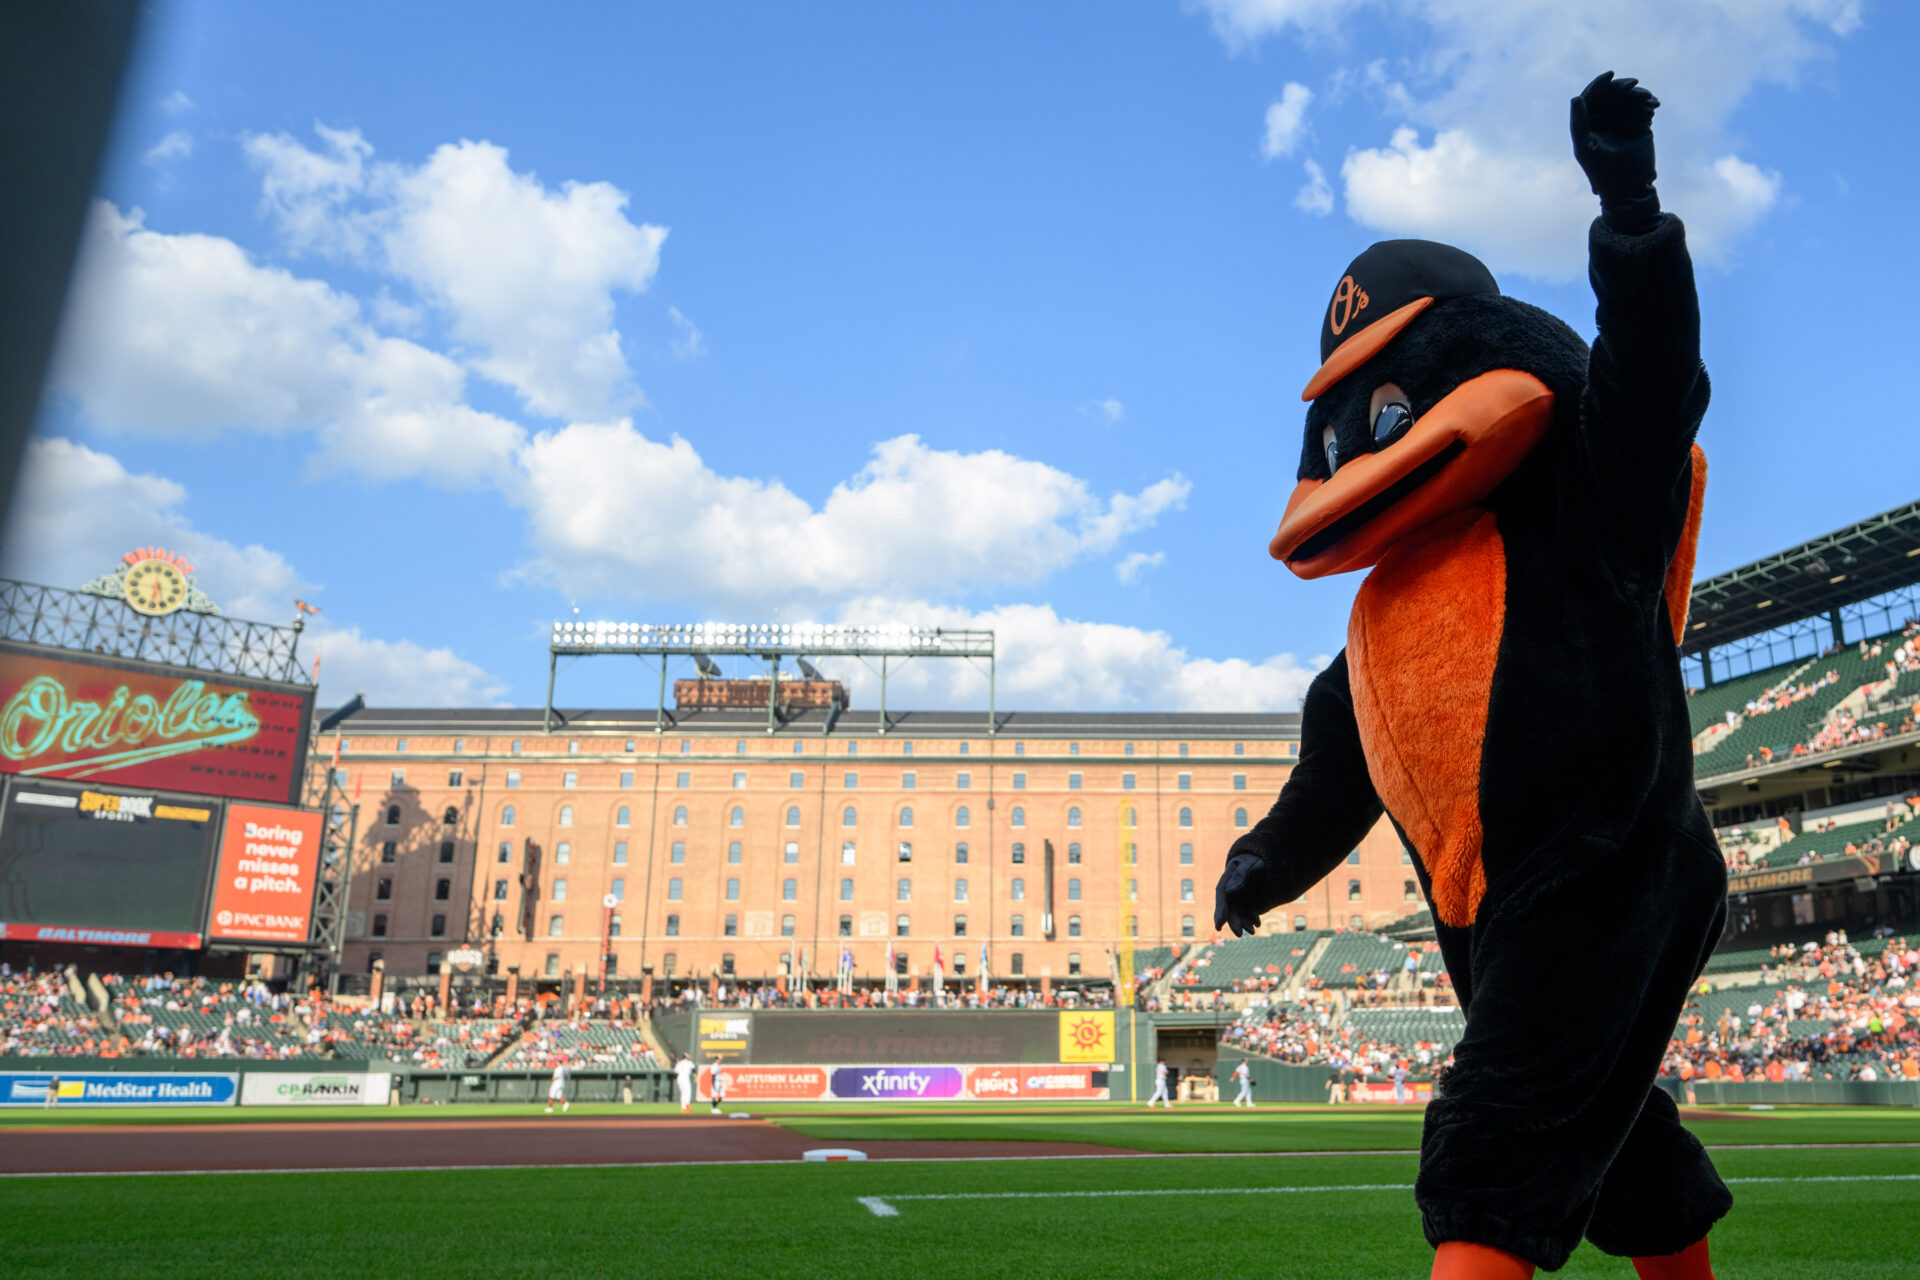 ‘Free Palestine’ Protestors Tried To Disrupt An Orioles Game, Fans Weren’t Having It [VIDEOS]